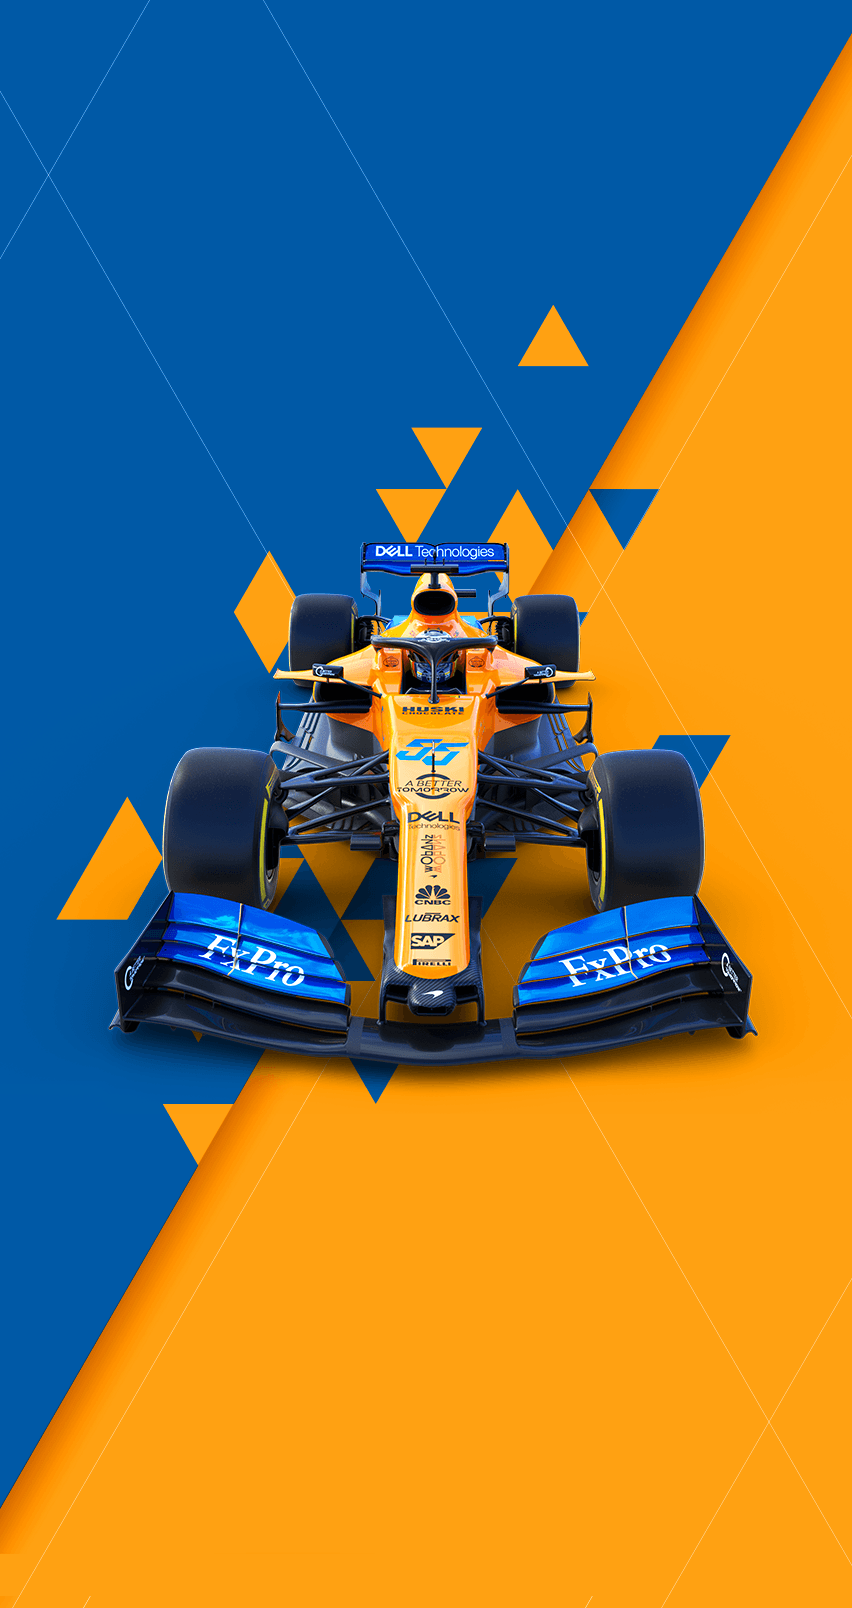 MCL34 iPhone 6 & 7 / Android Official Wallpaper